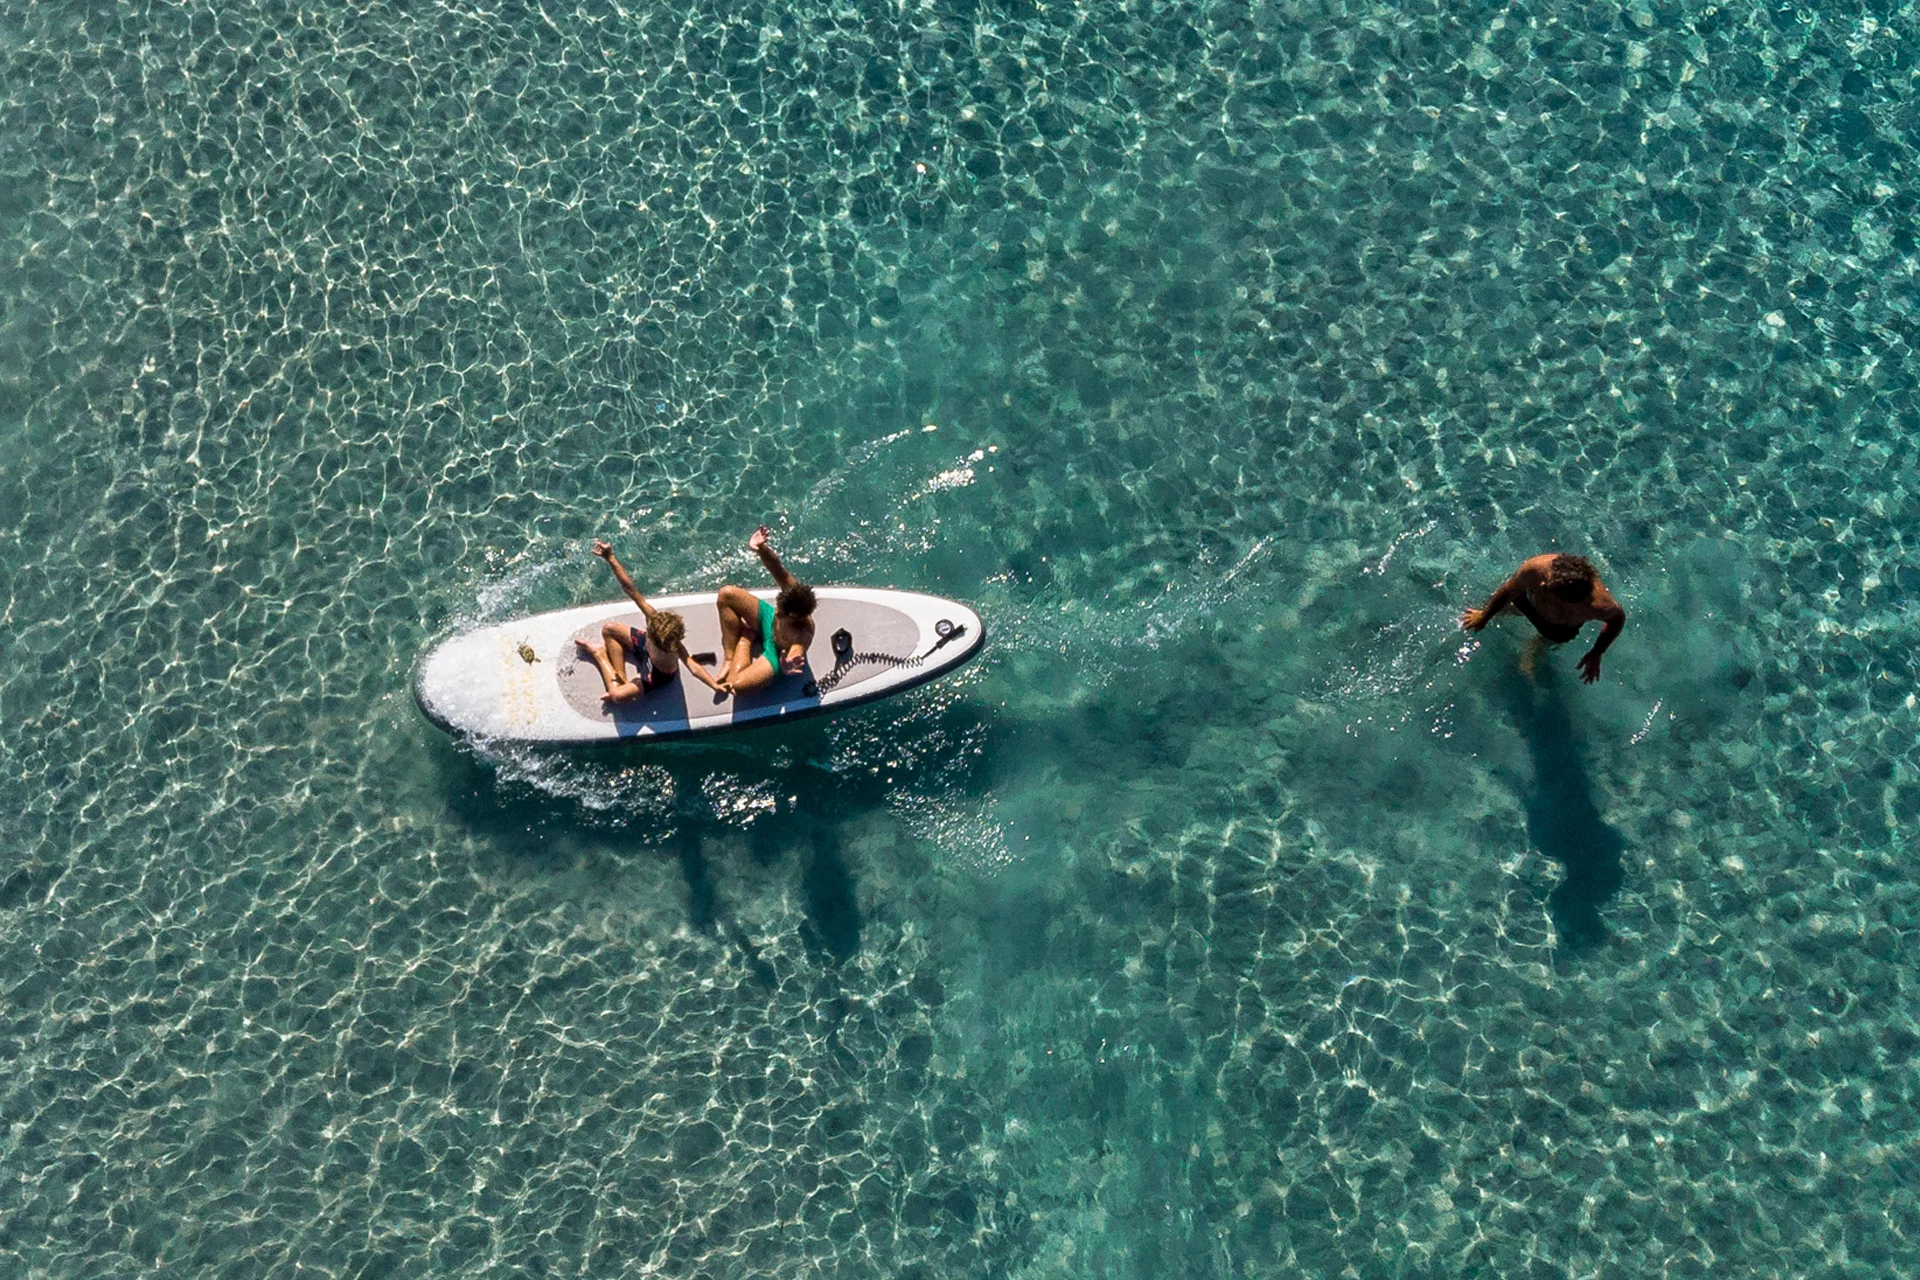 Cote d'azur paddle surfing blue water